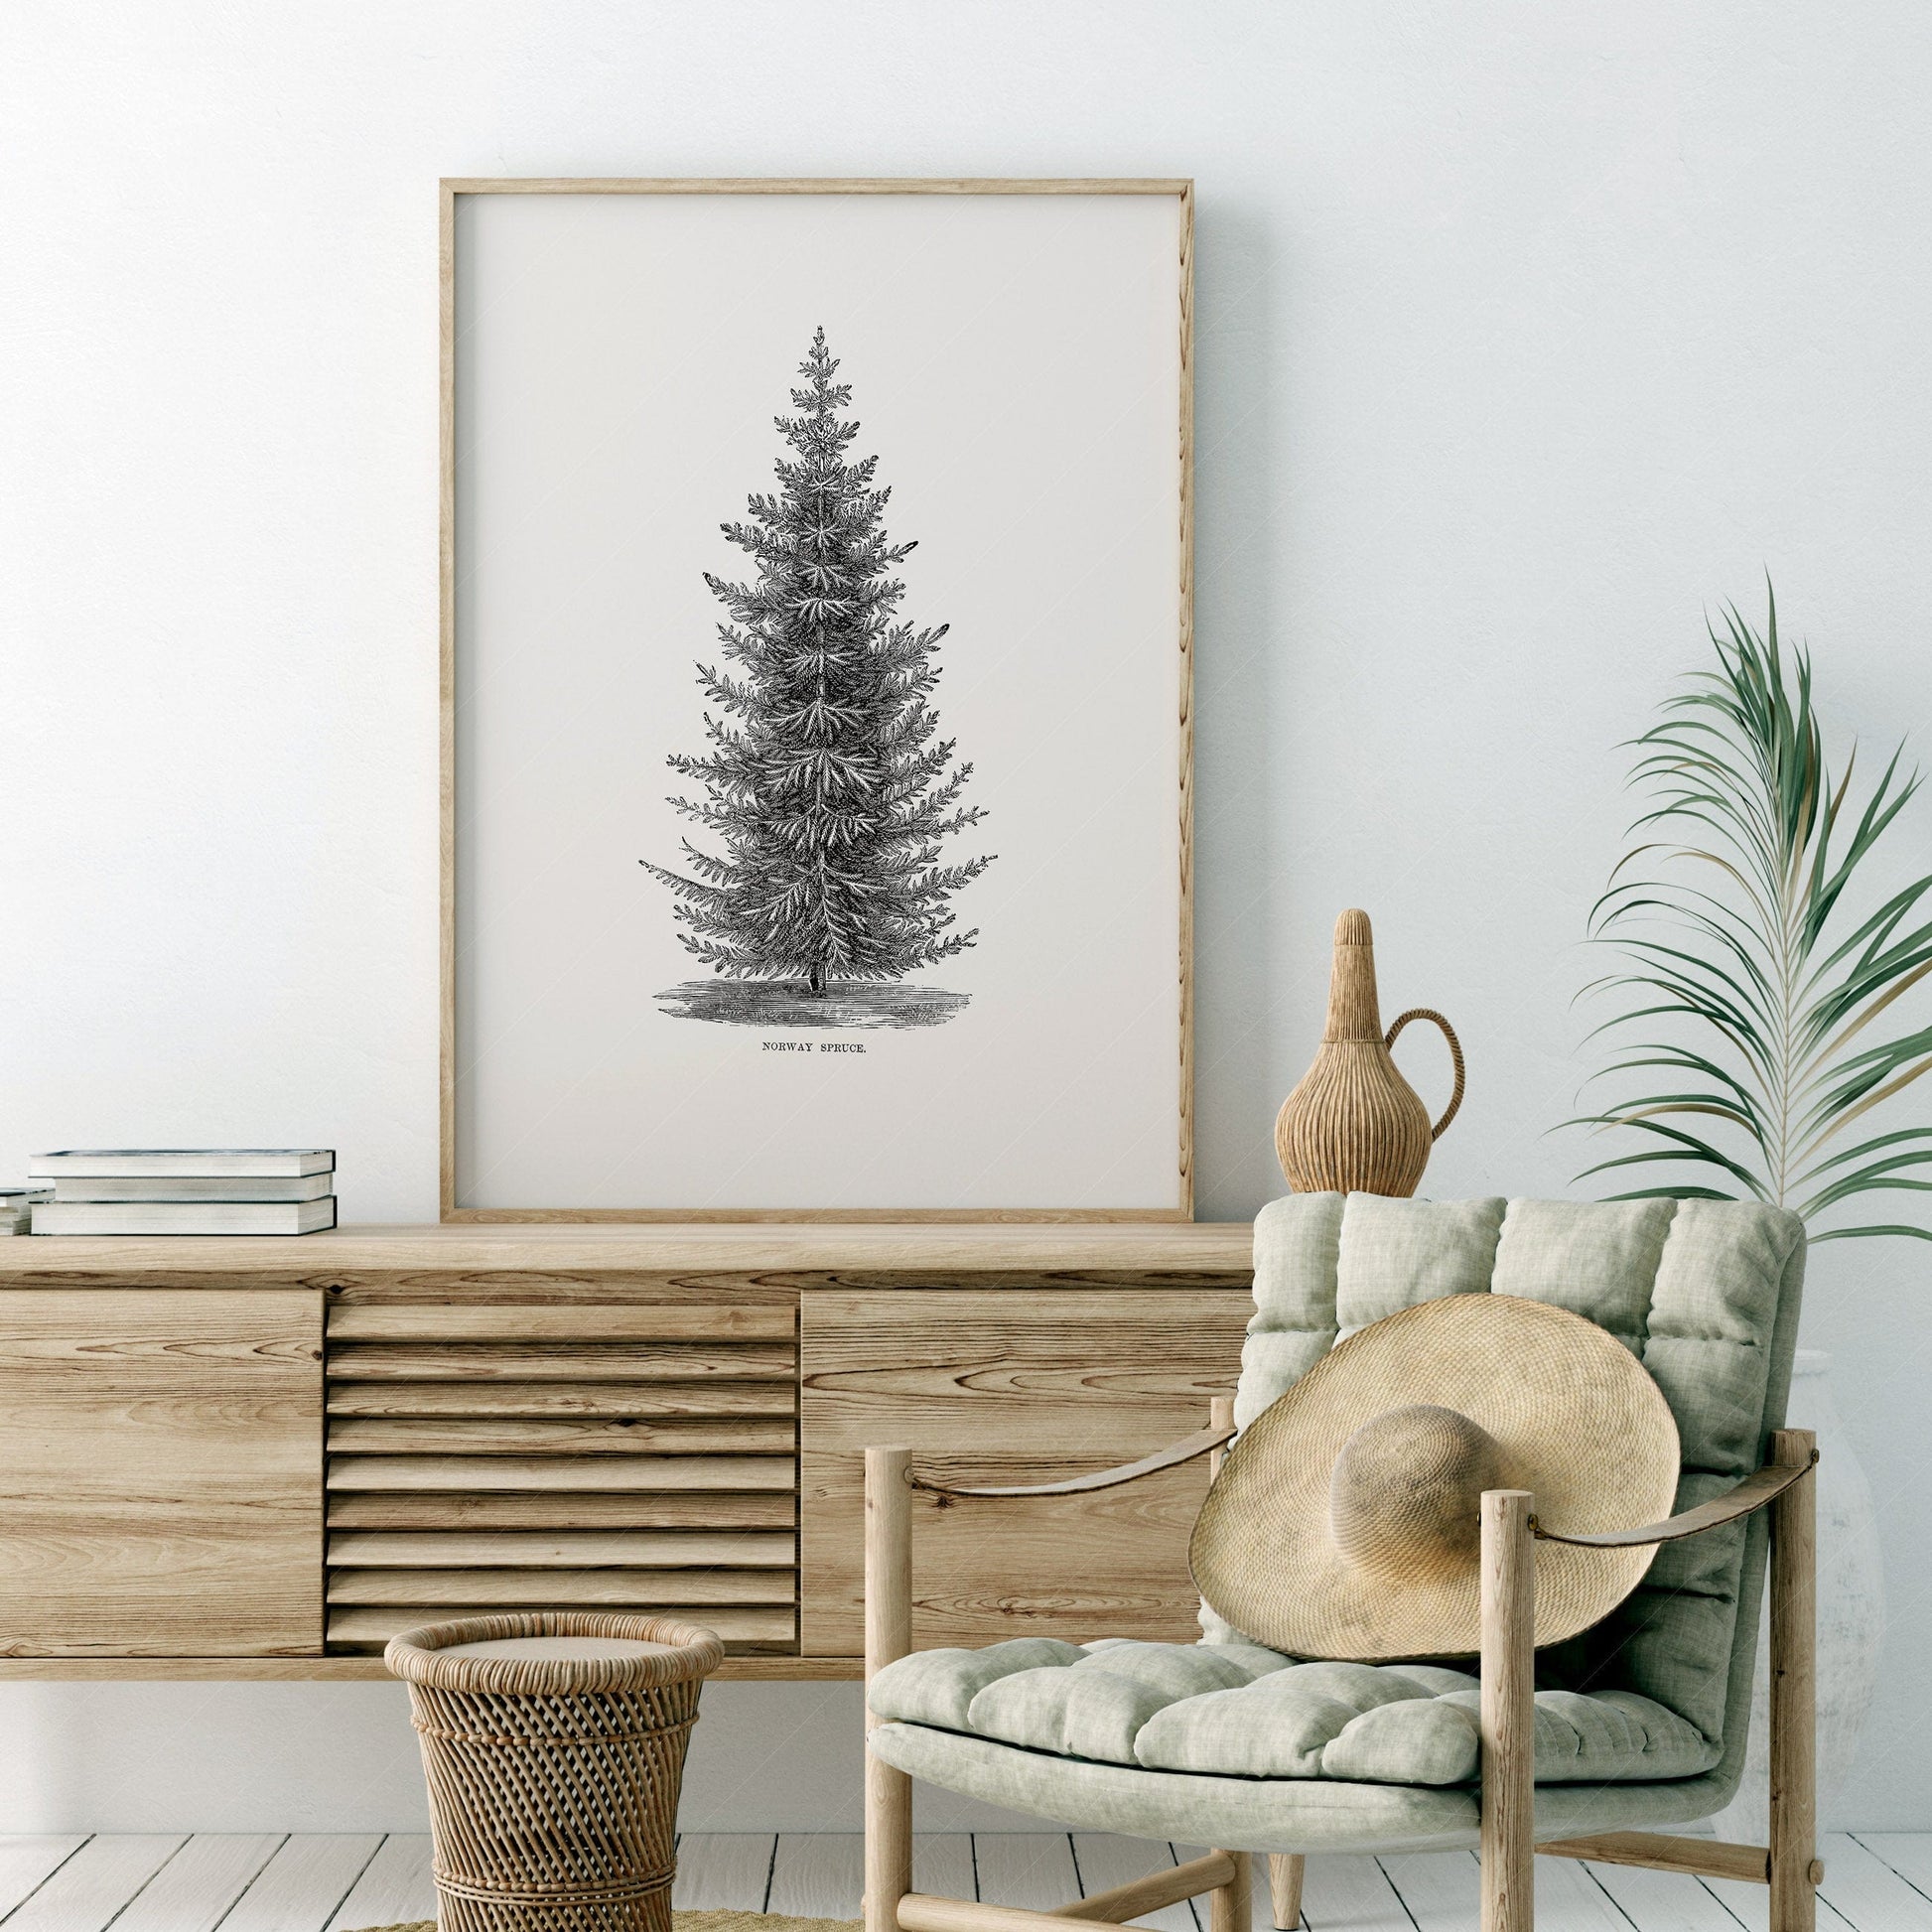 Home Poster Decor Norway spruce tree, Botanical Print, Forest Poster, Winter Tree Photo, Pine Tree Print, Vintage Nature Art, Vintage Gift, Nordic Forest